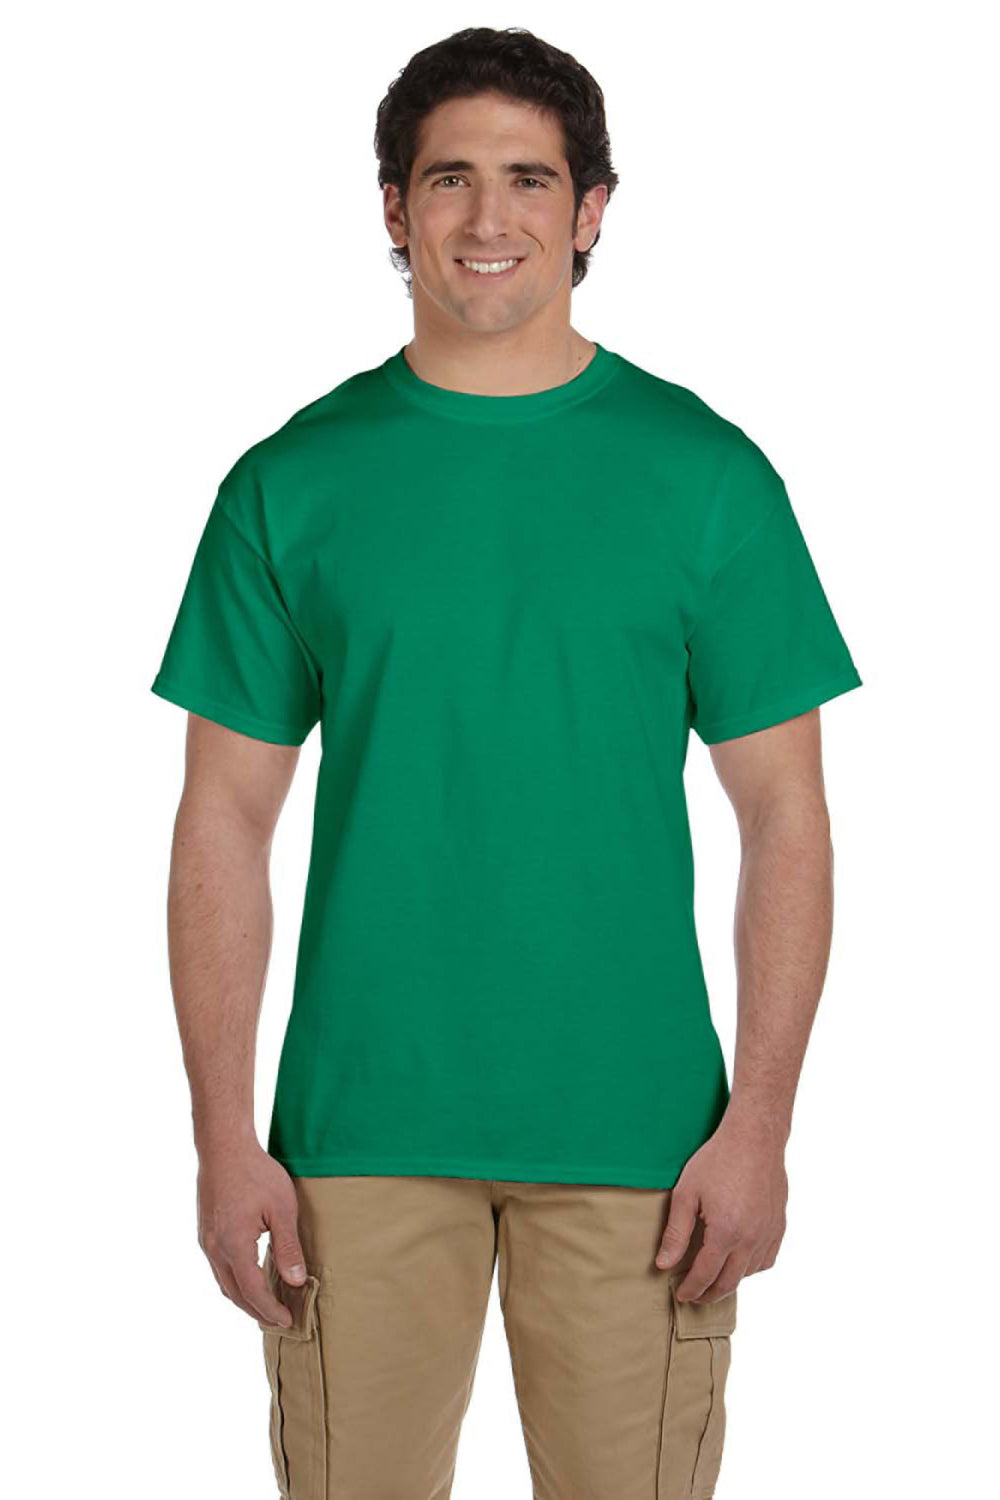 Fruit Of The Loom 3931 Mens HD Jersey Short Sleeve Crewneck T-Shirt Heather Green Front